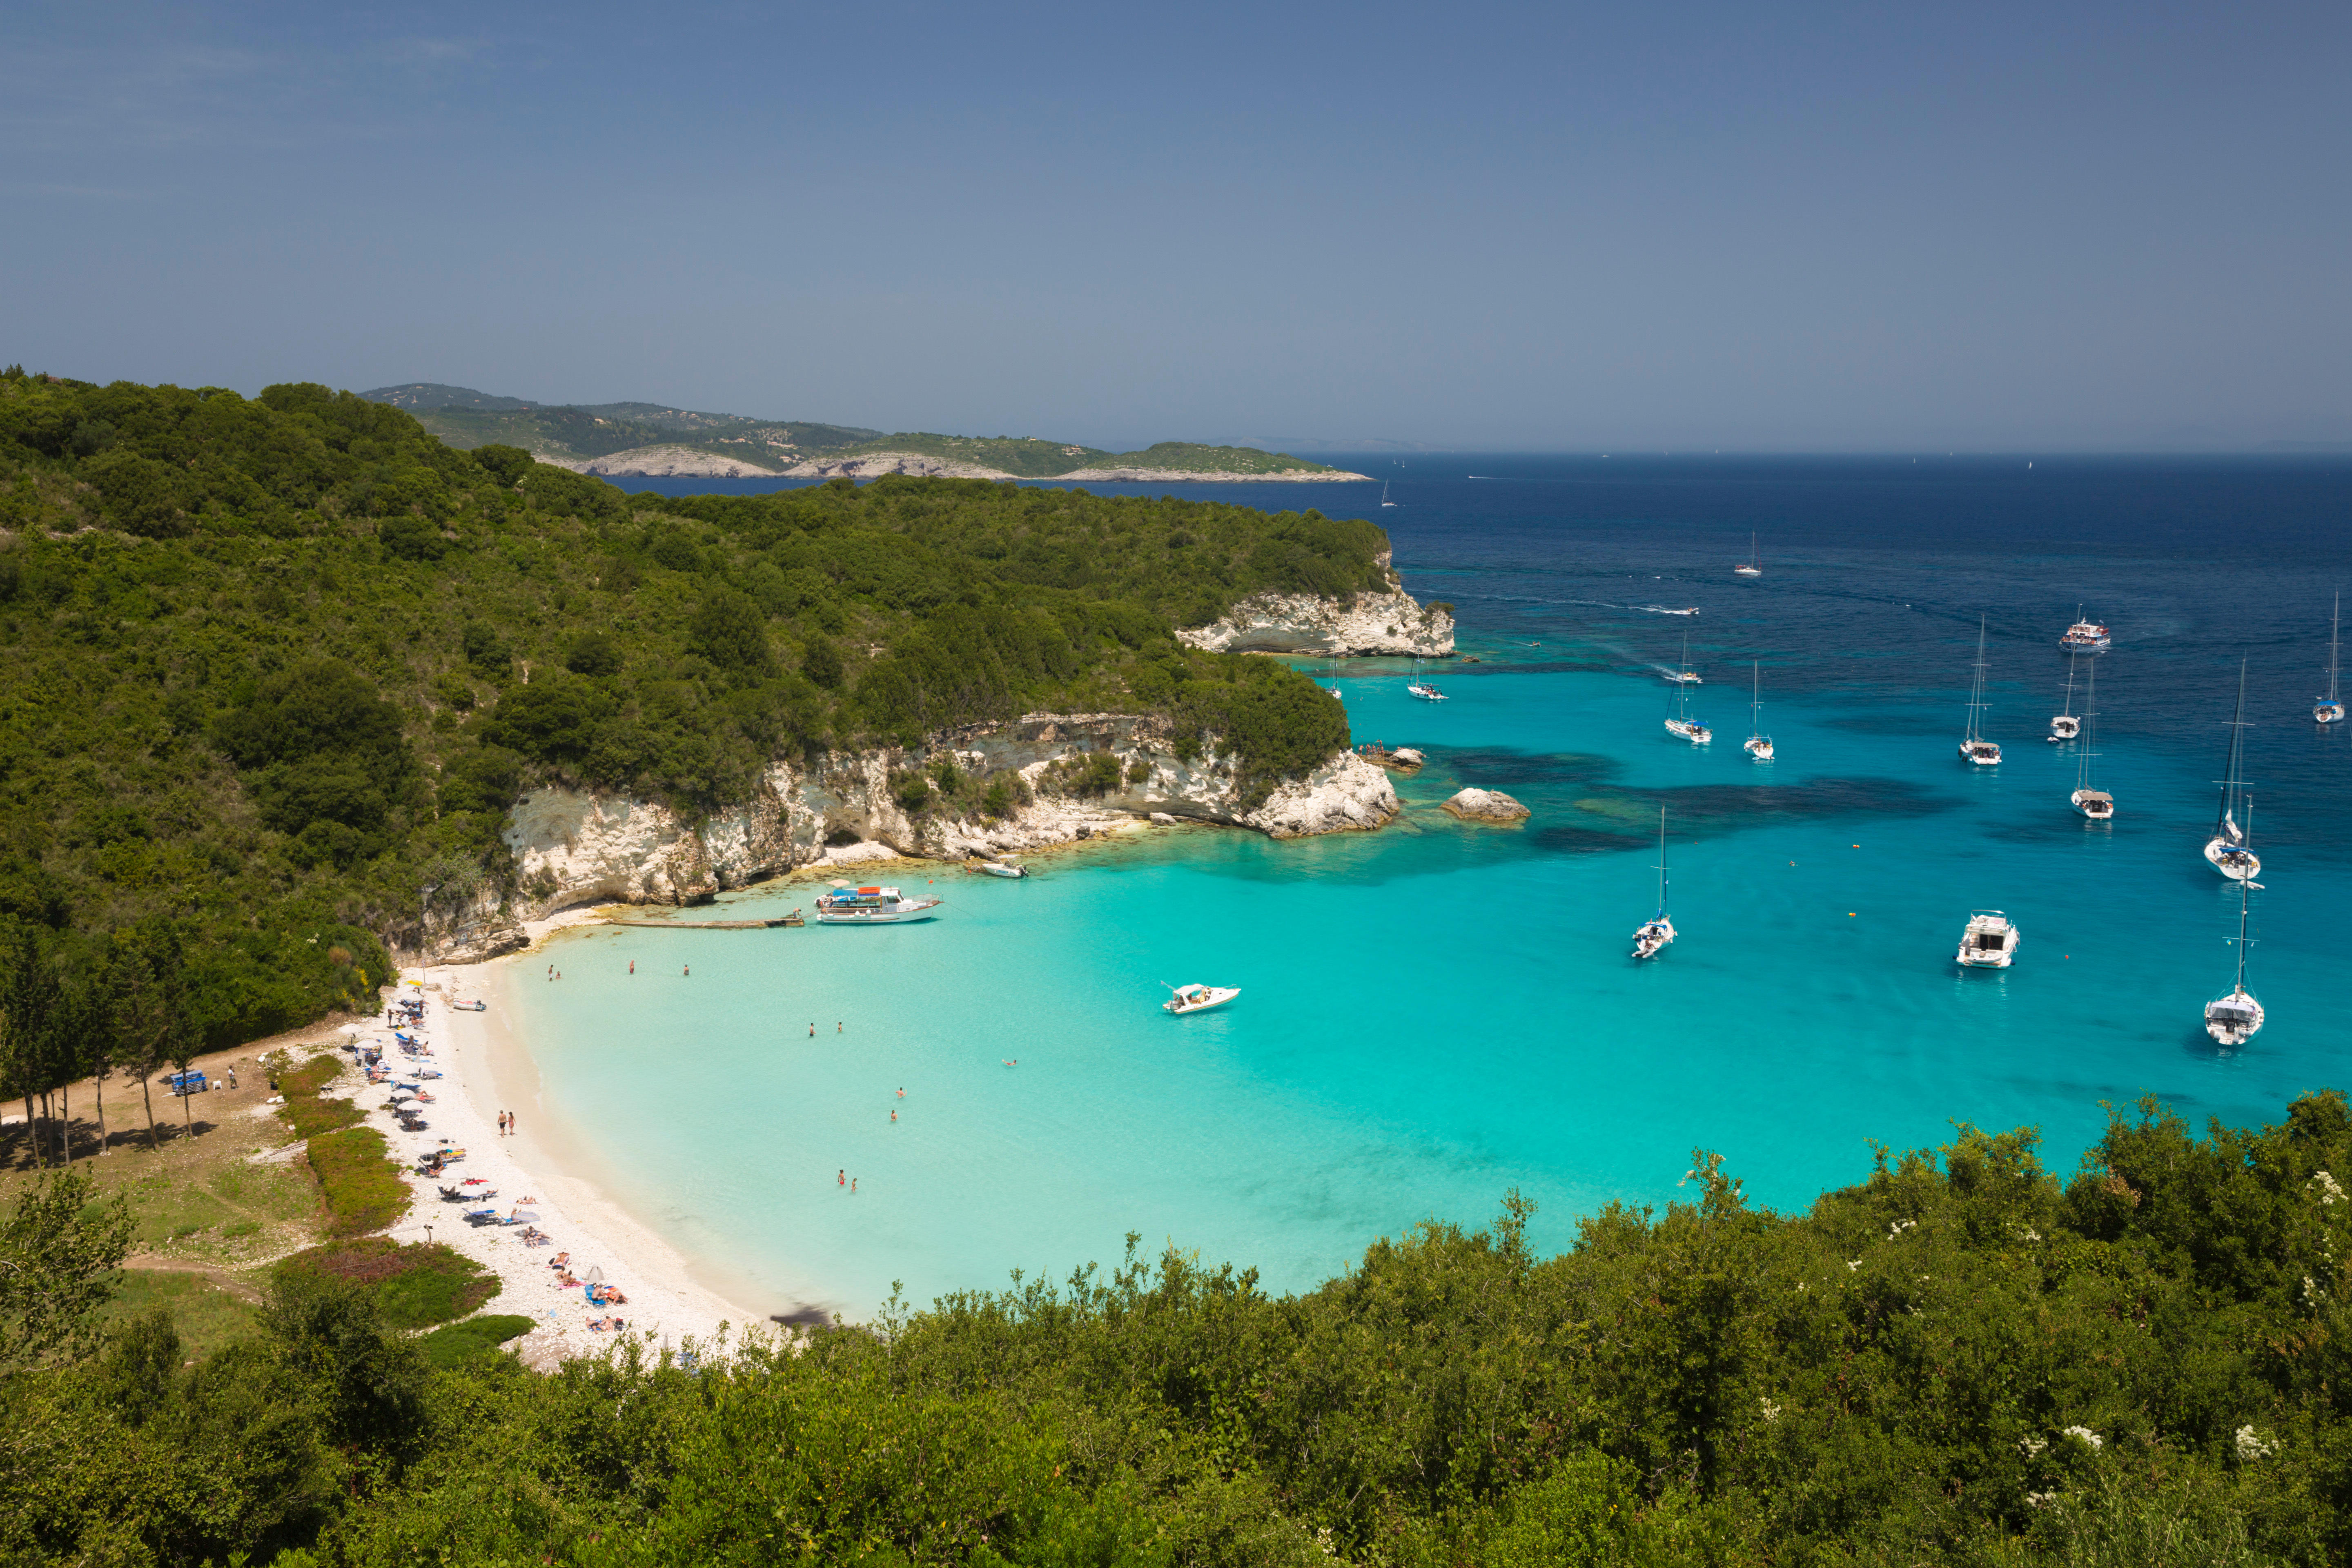 Voutoumi beach is found on Antipaxos, one of Greece's smallest islands